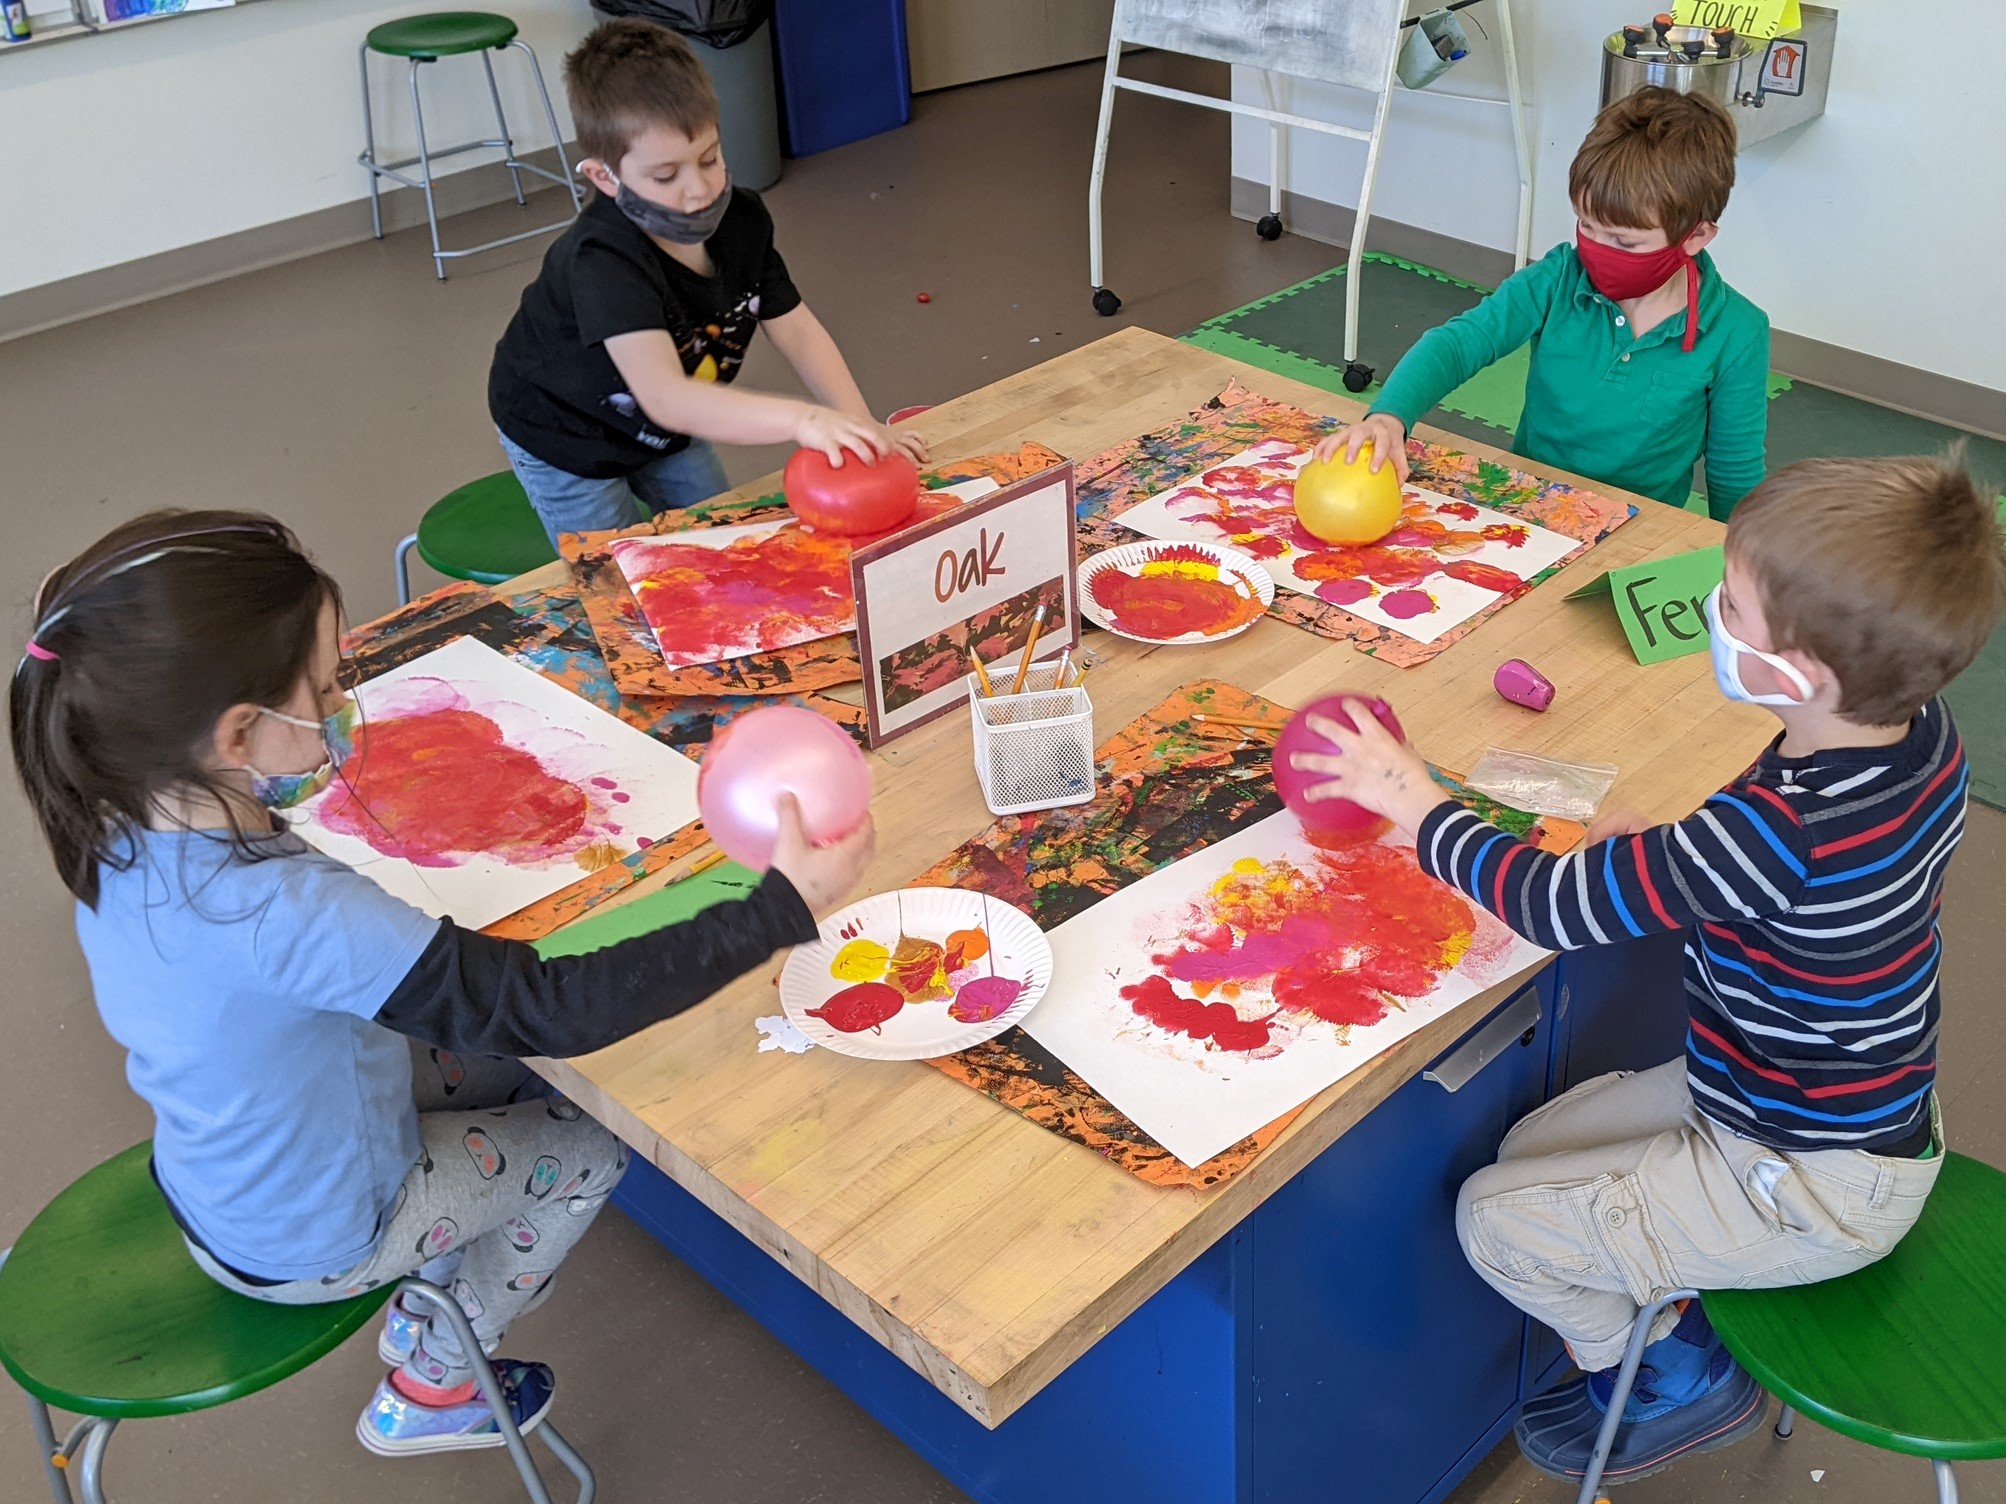 Four children painting with balloons